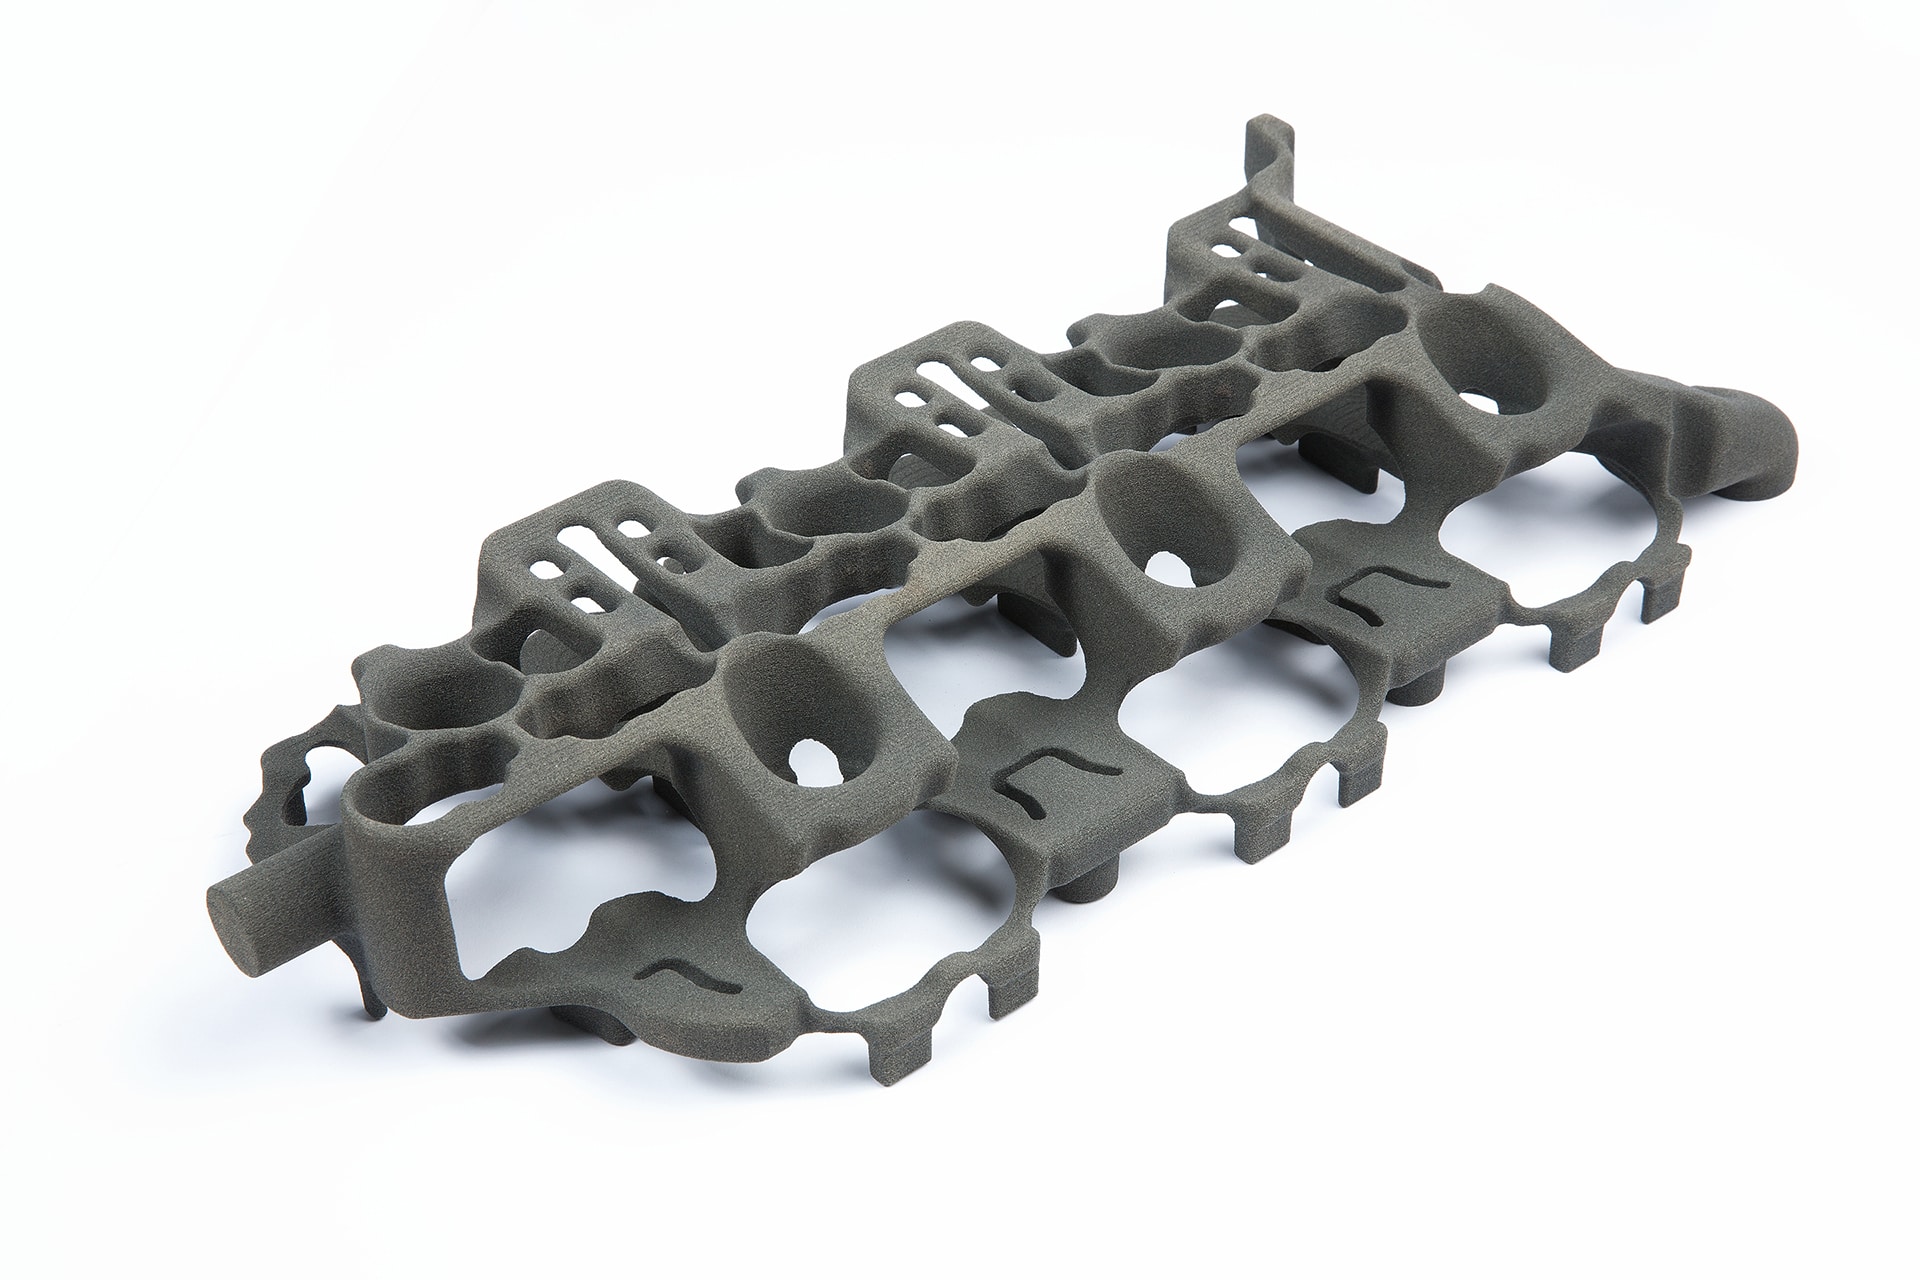 Using Stratasys FDM Technology in the Sand Casting Process - Stratasys